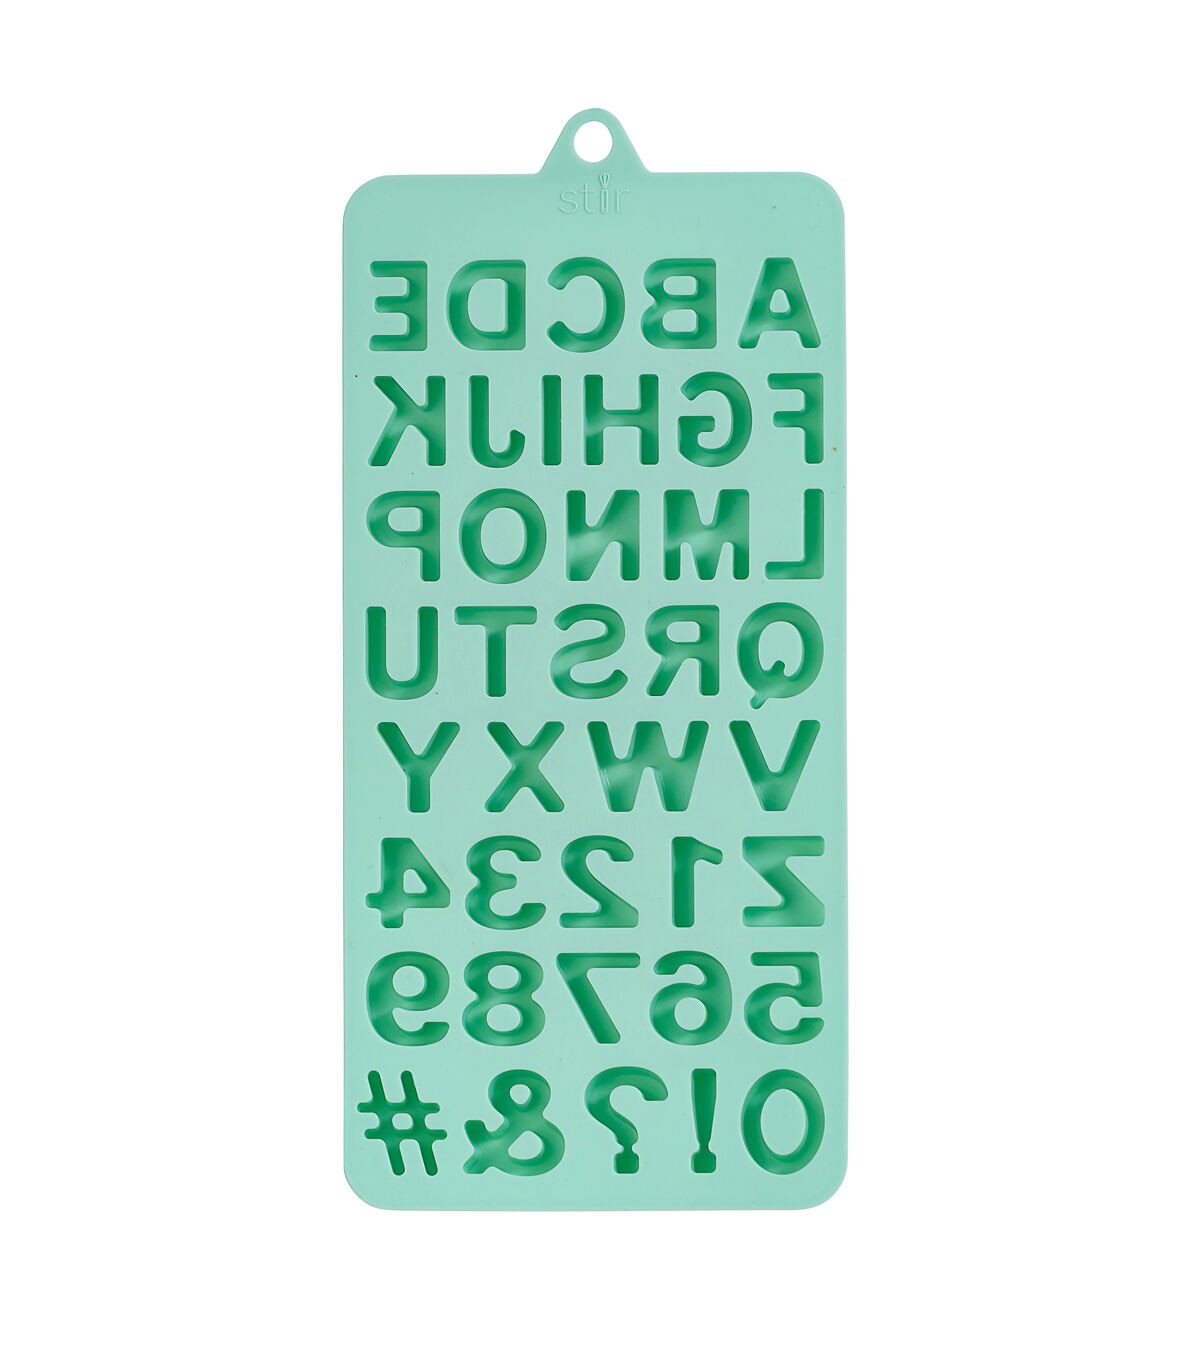 Stir 4 x 9 Silicone Letters & Numbers Candy Mold - Molds - Baking & Kitchen